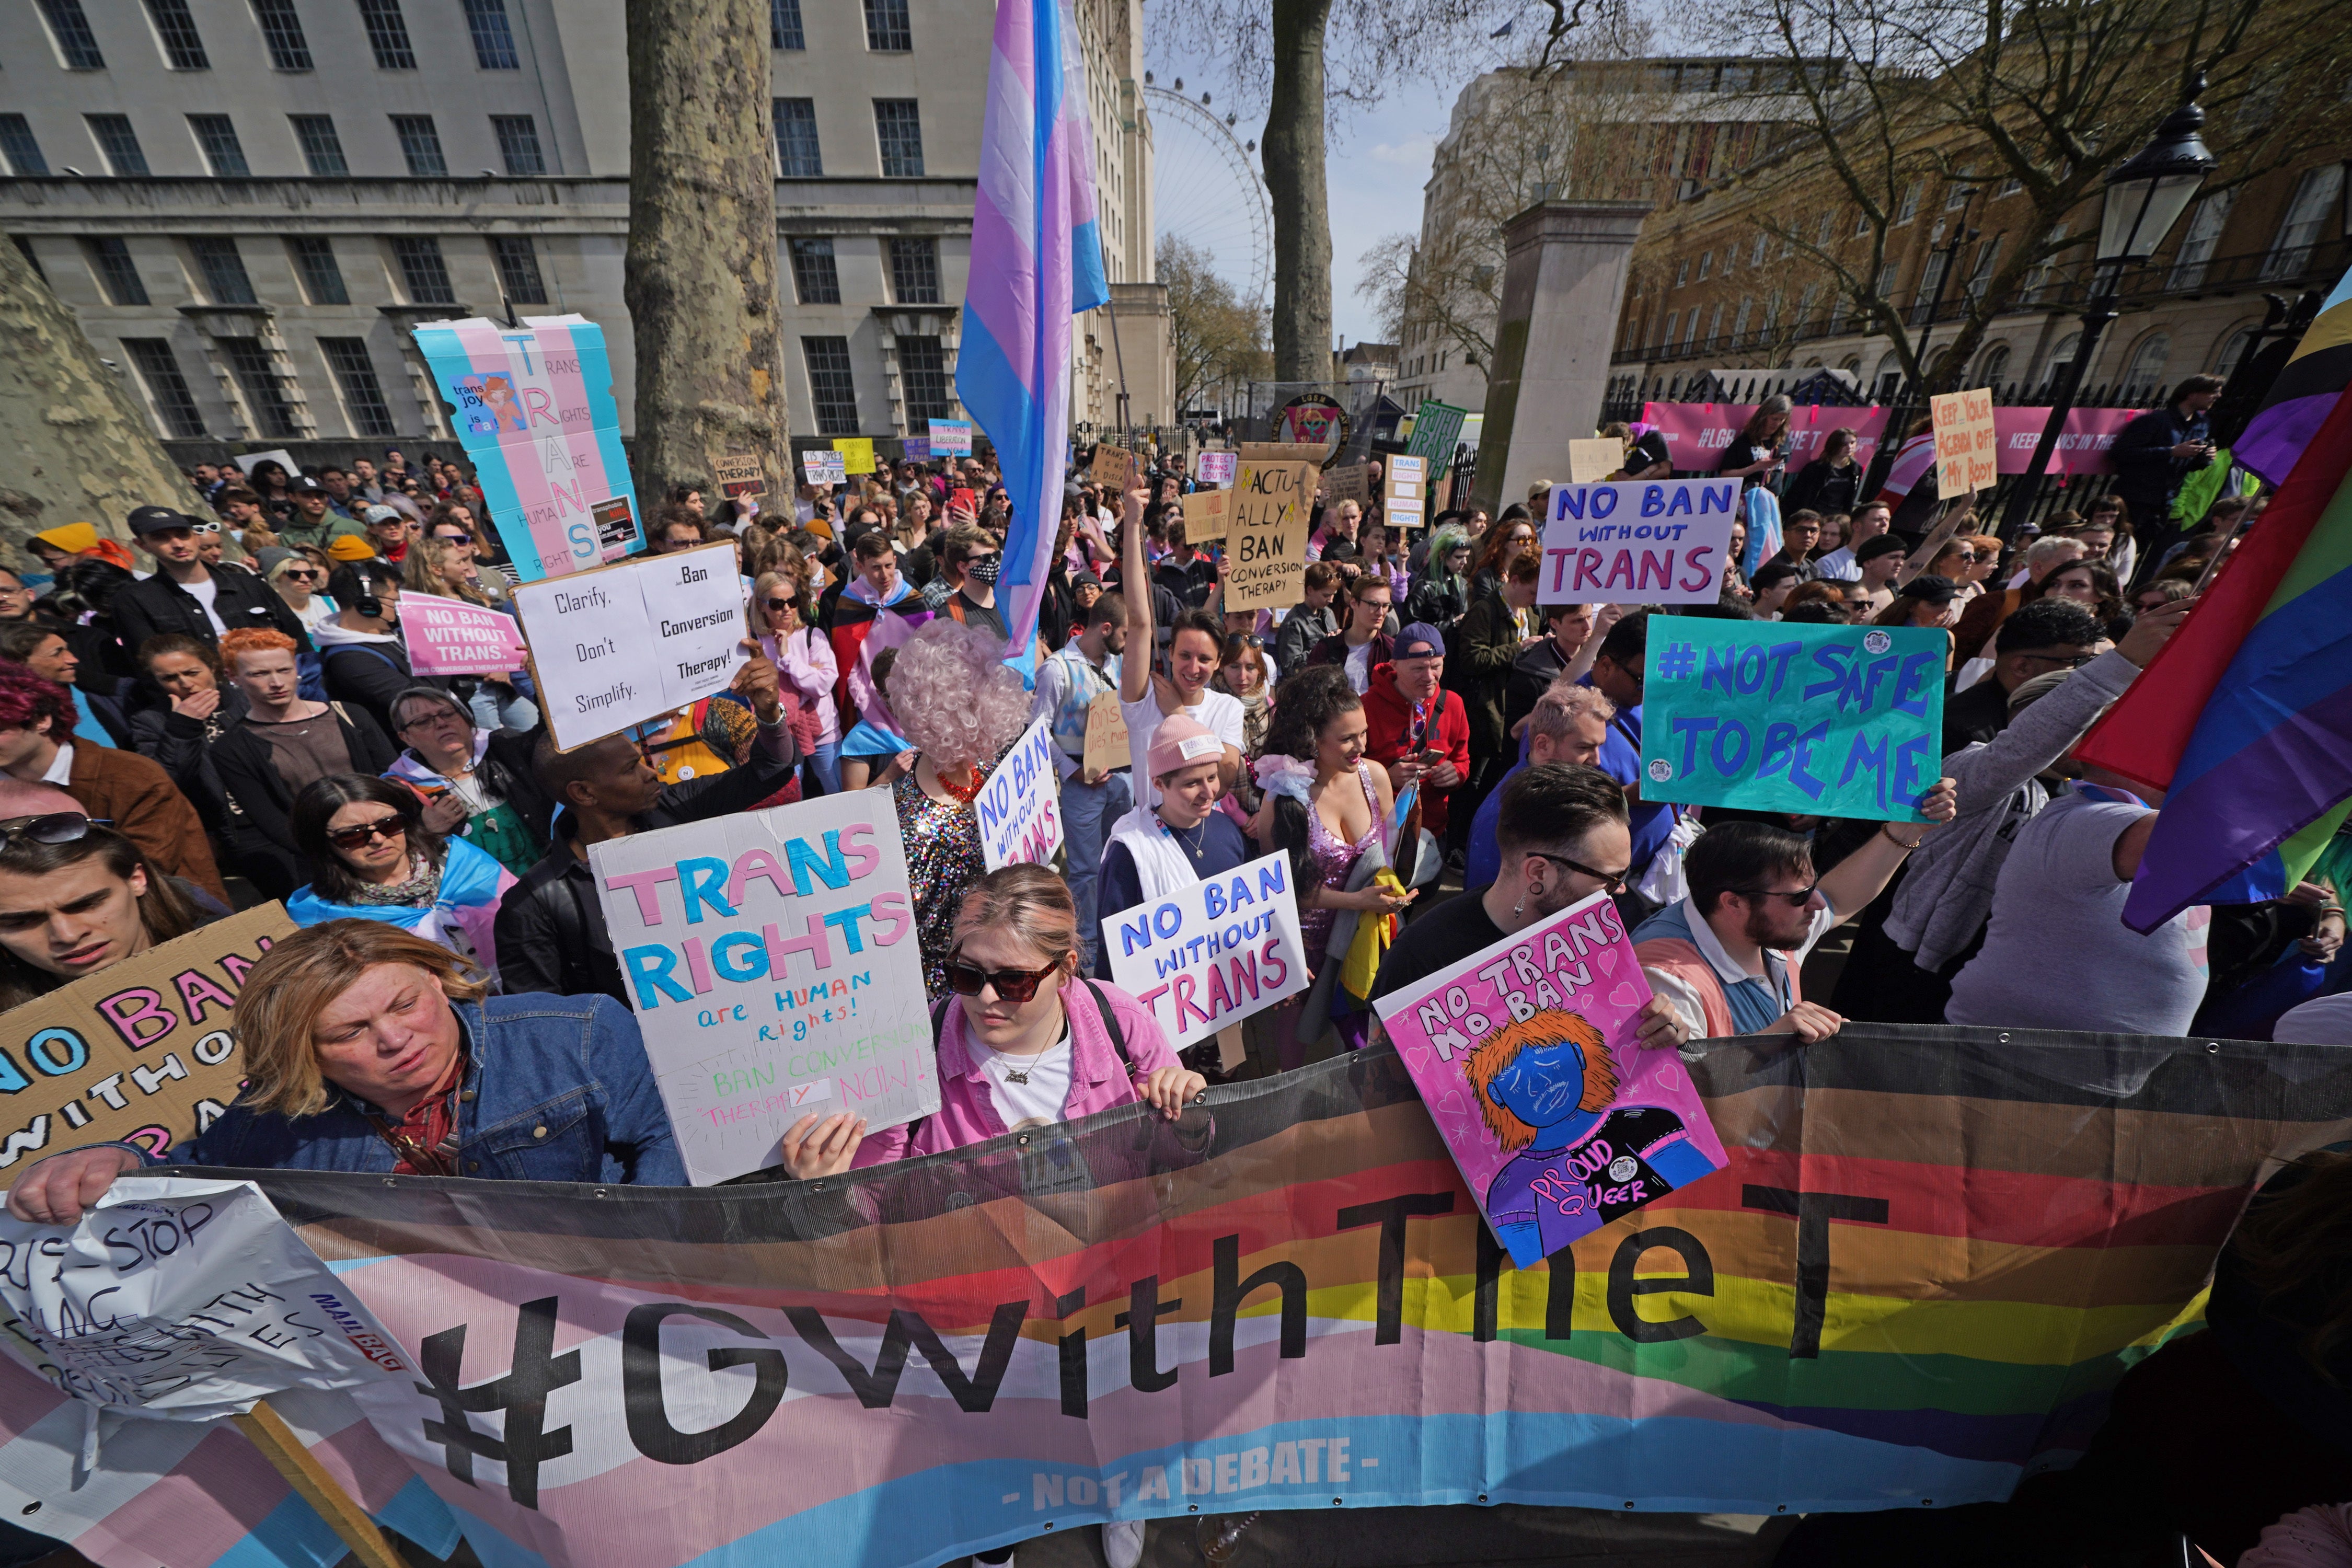 Hundreds of demonstrators gathered outside Downing Street to demand trans people be included in a proposed ban on conversion therapy (Yui Mok/PA)